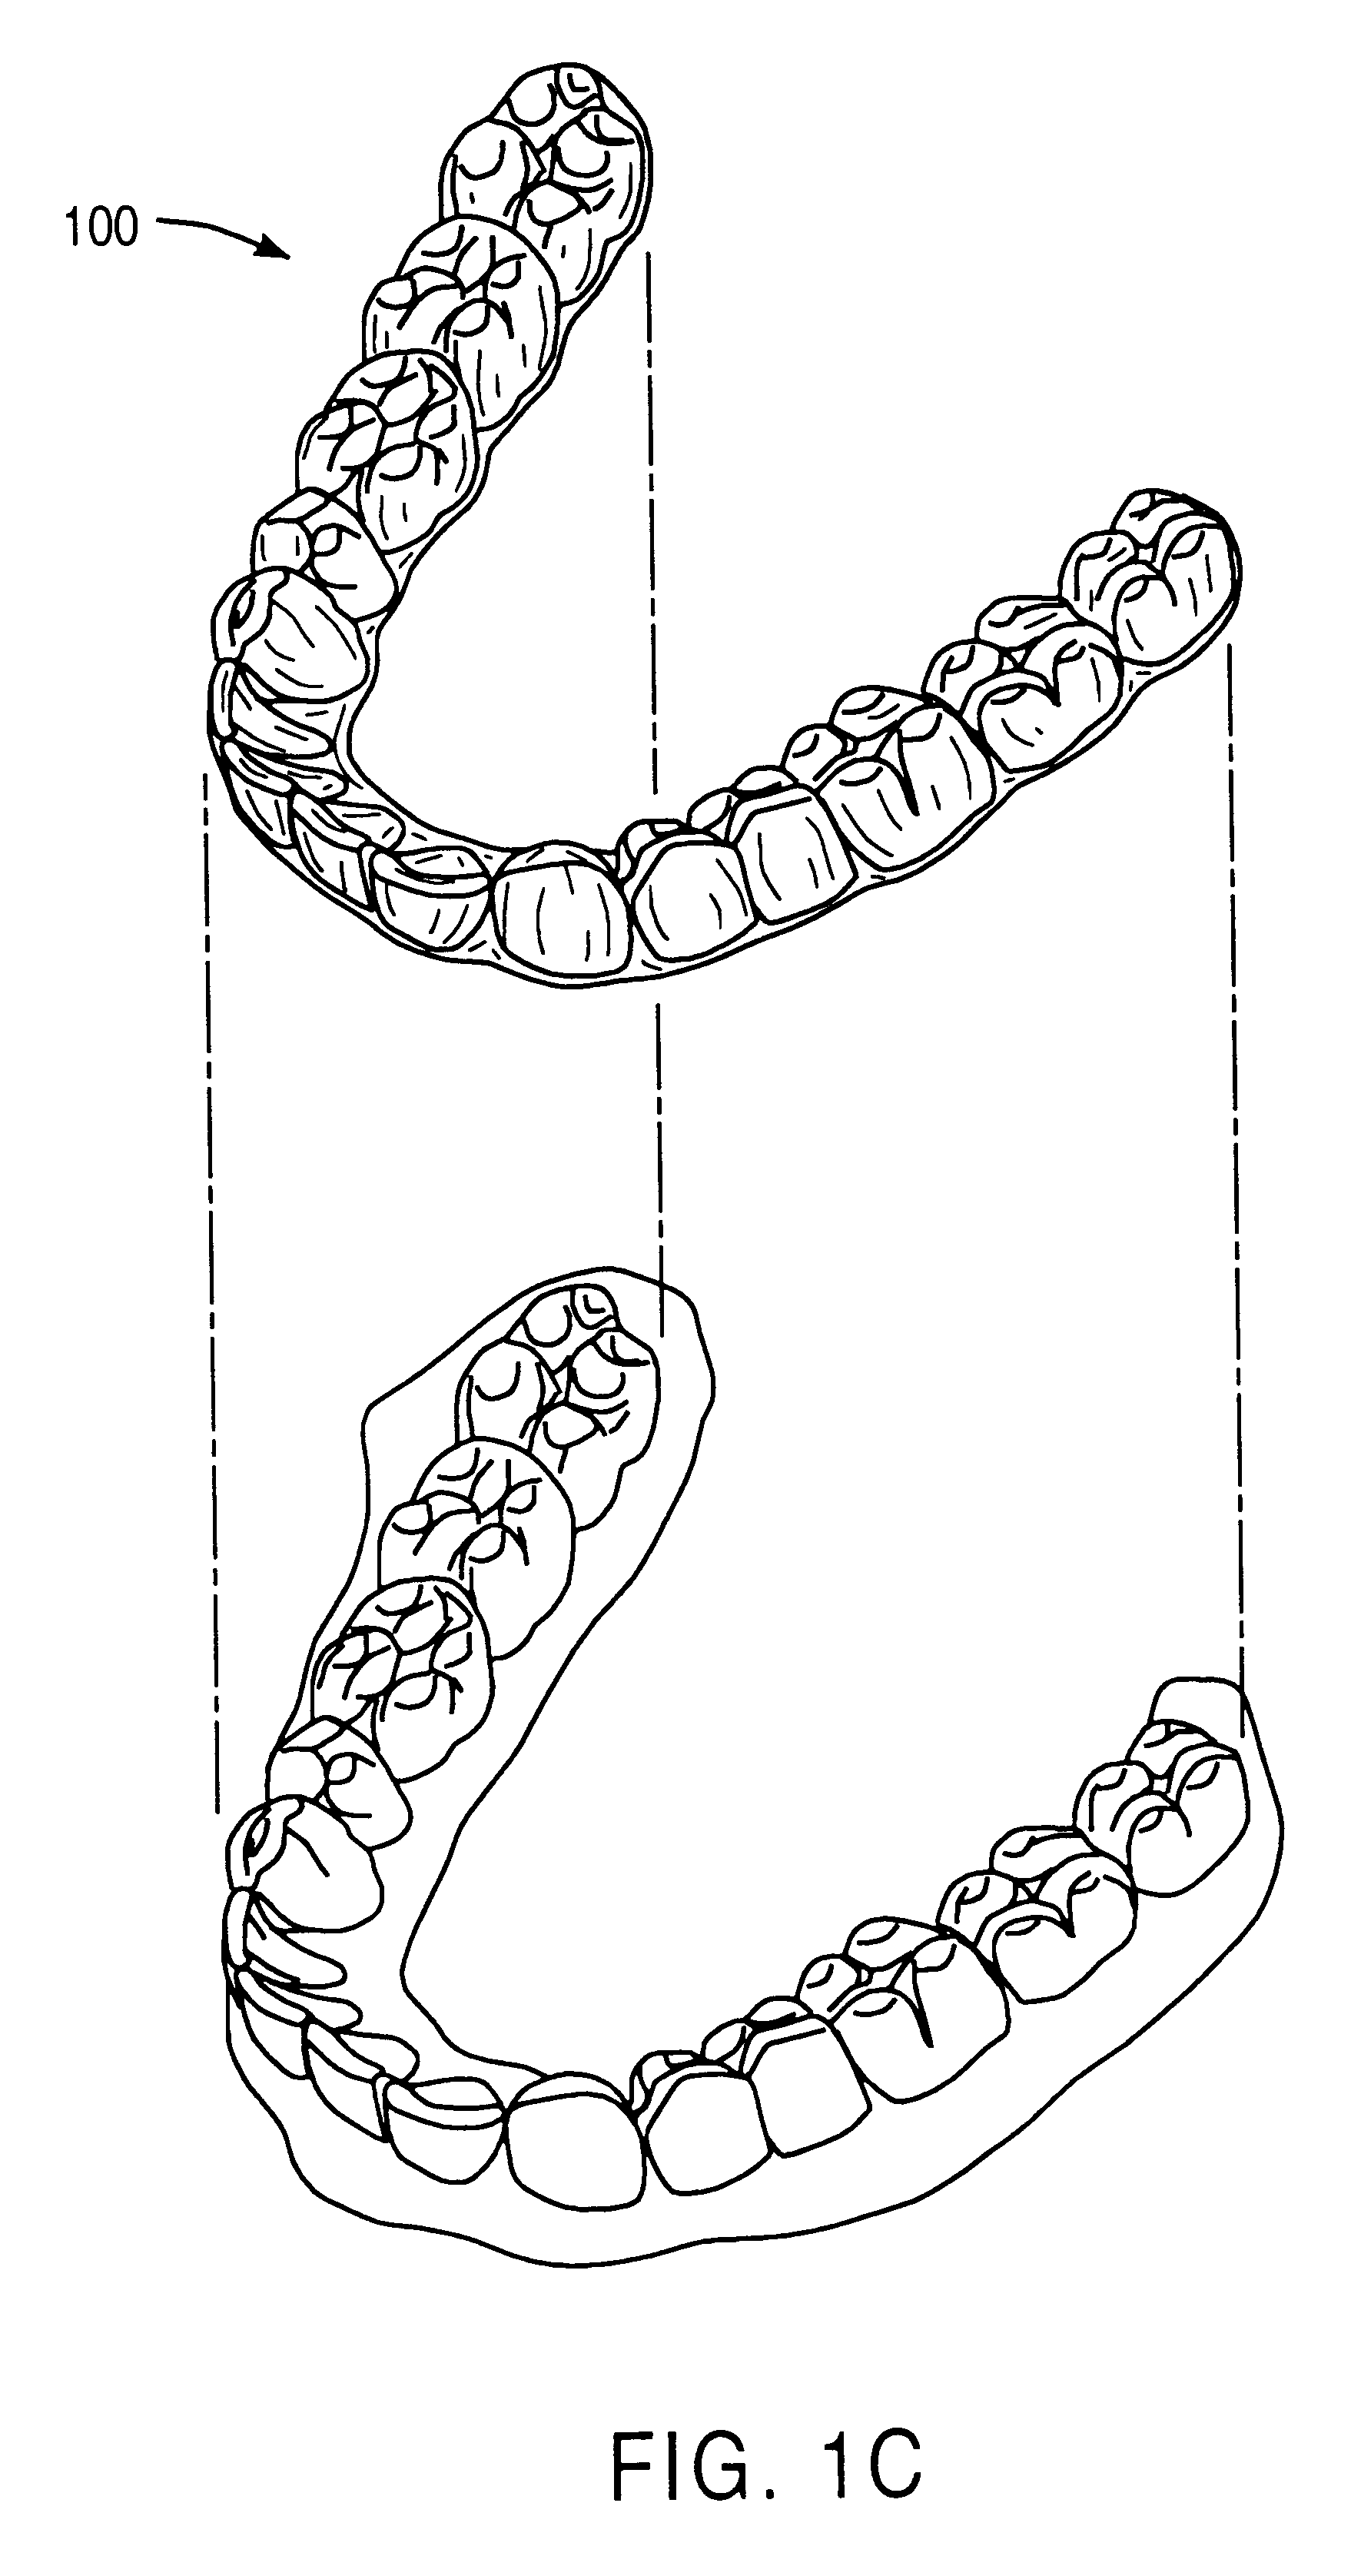 Method and system for incrementally moving teeth